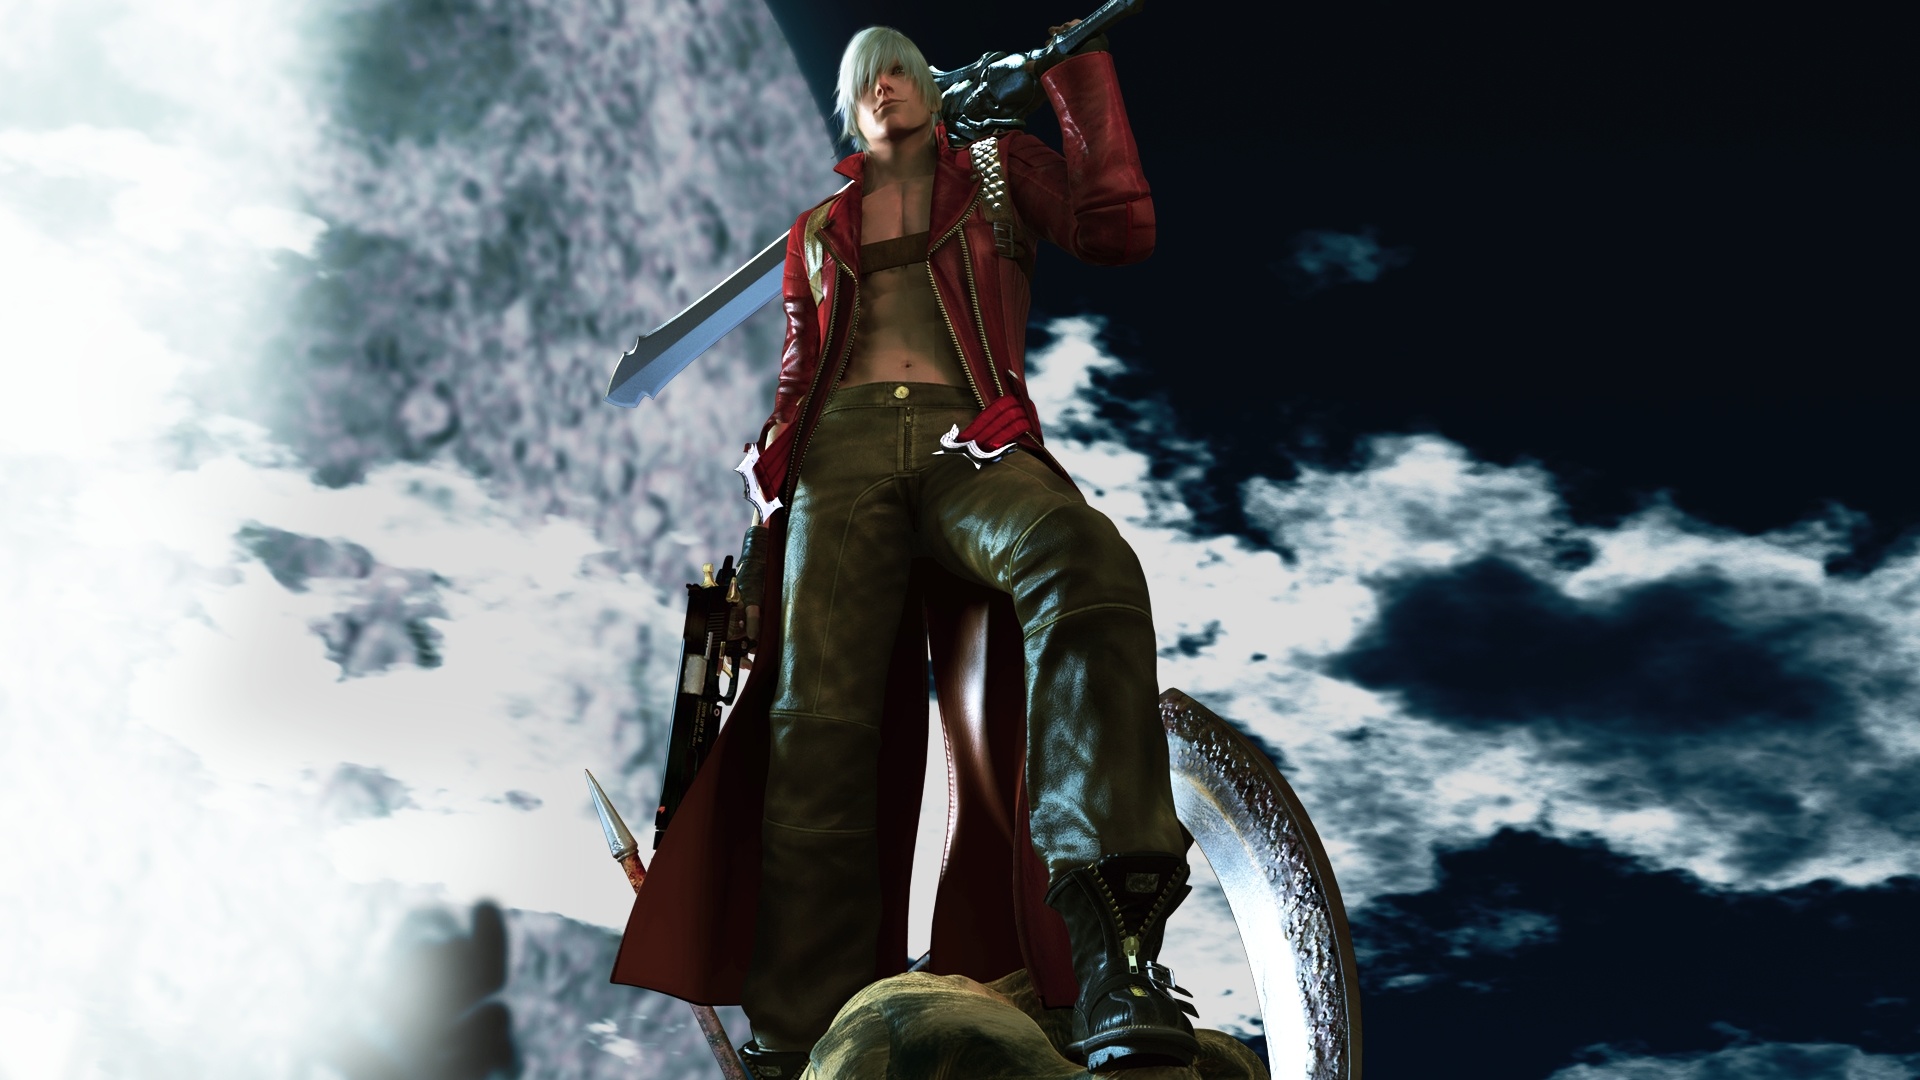 devil may cry hd collection 144hz